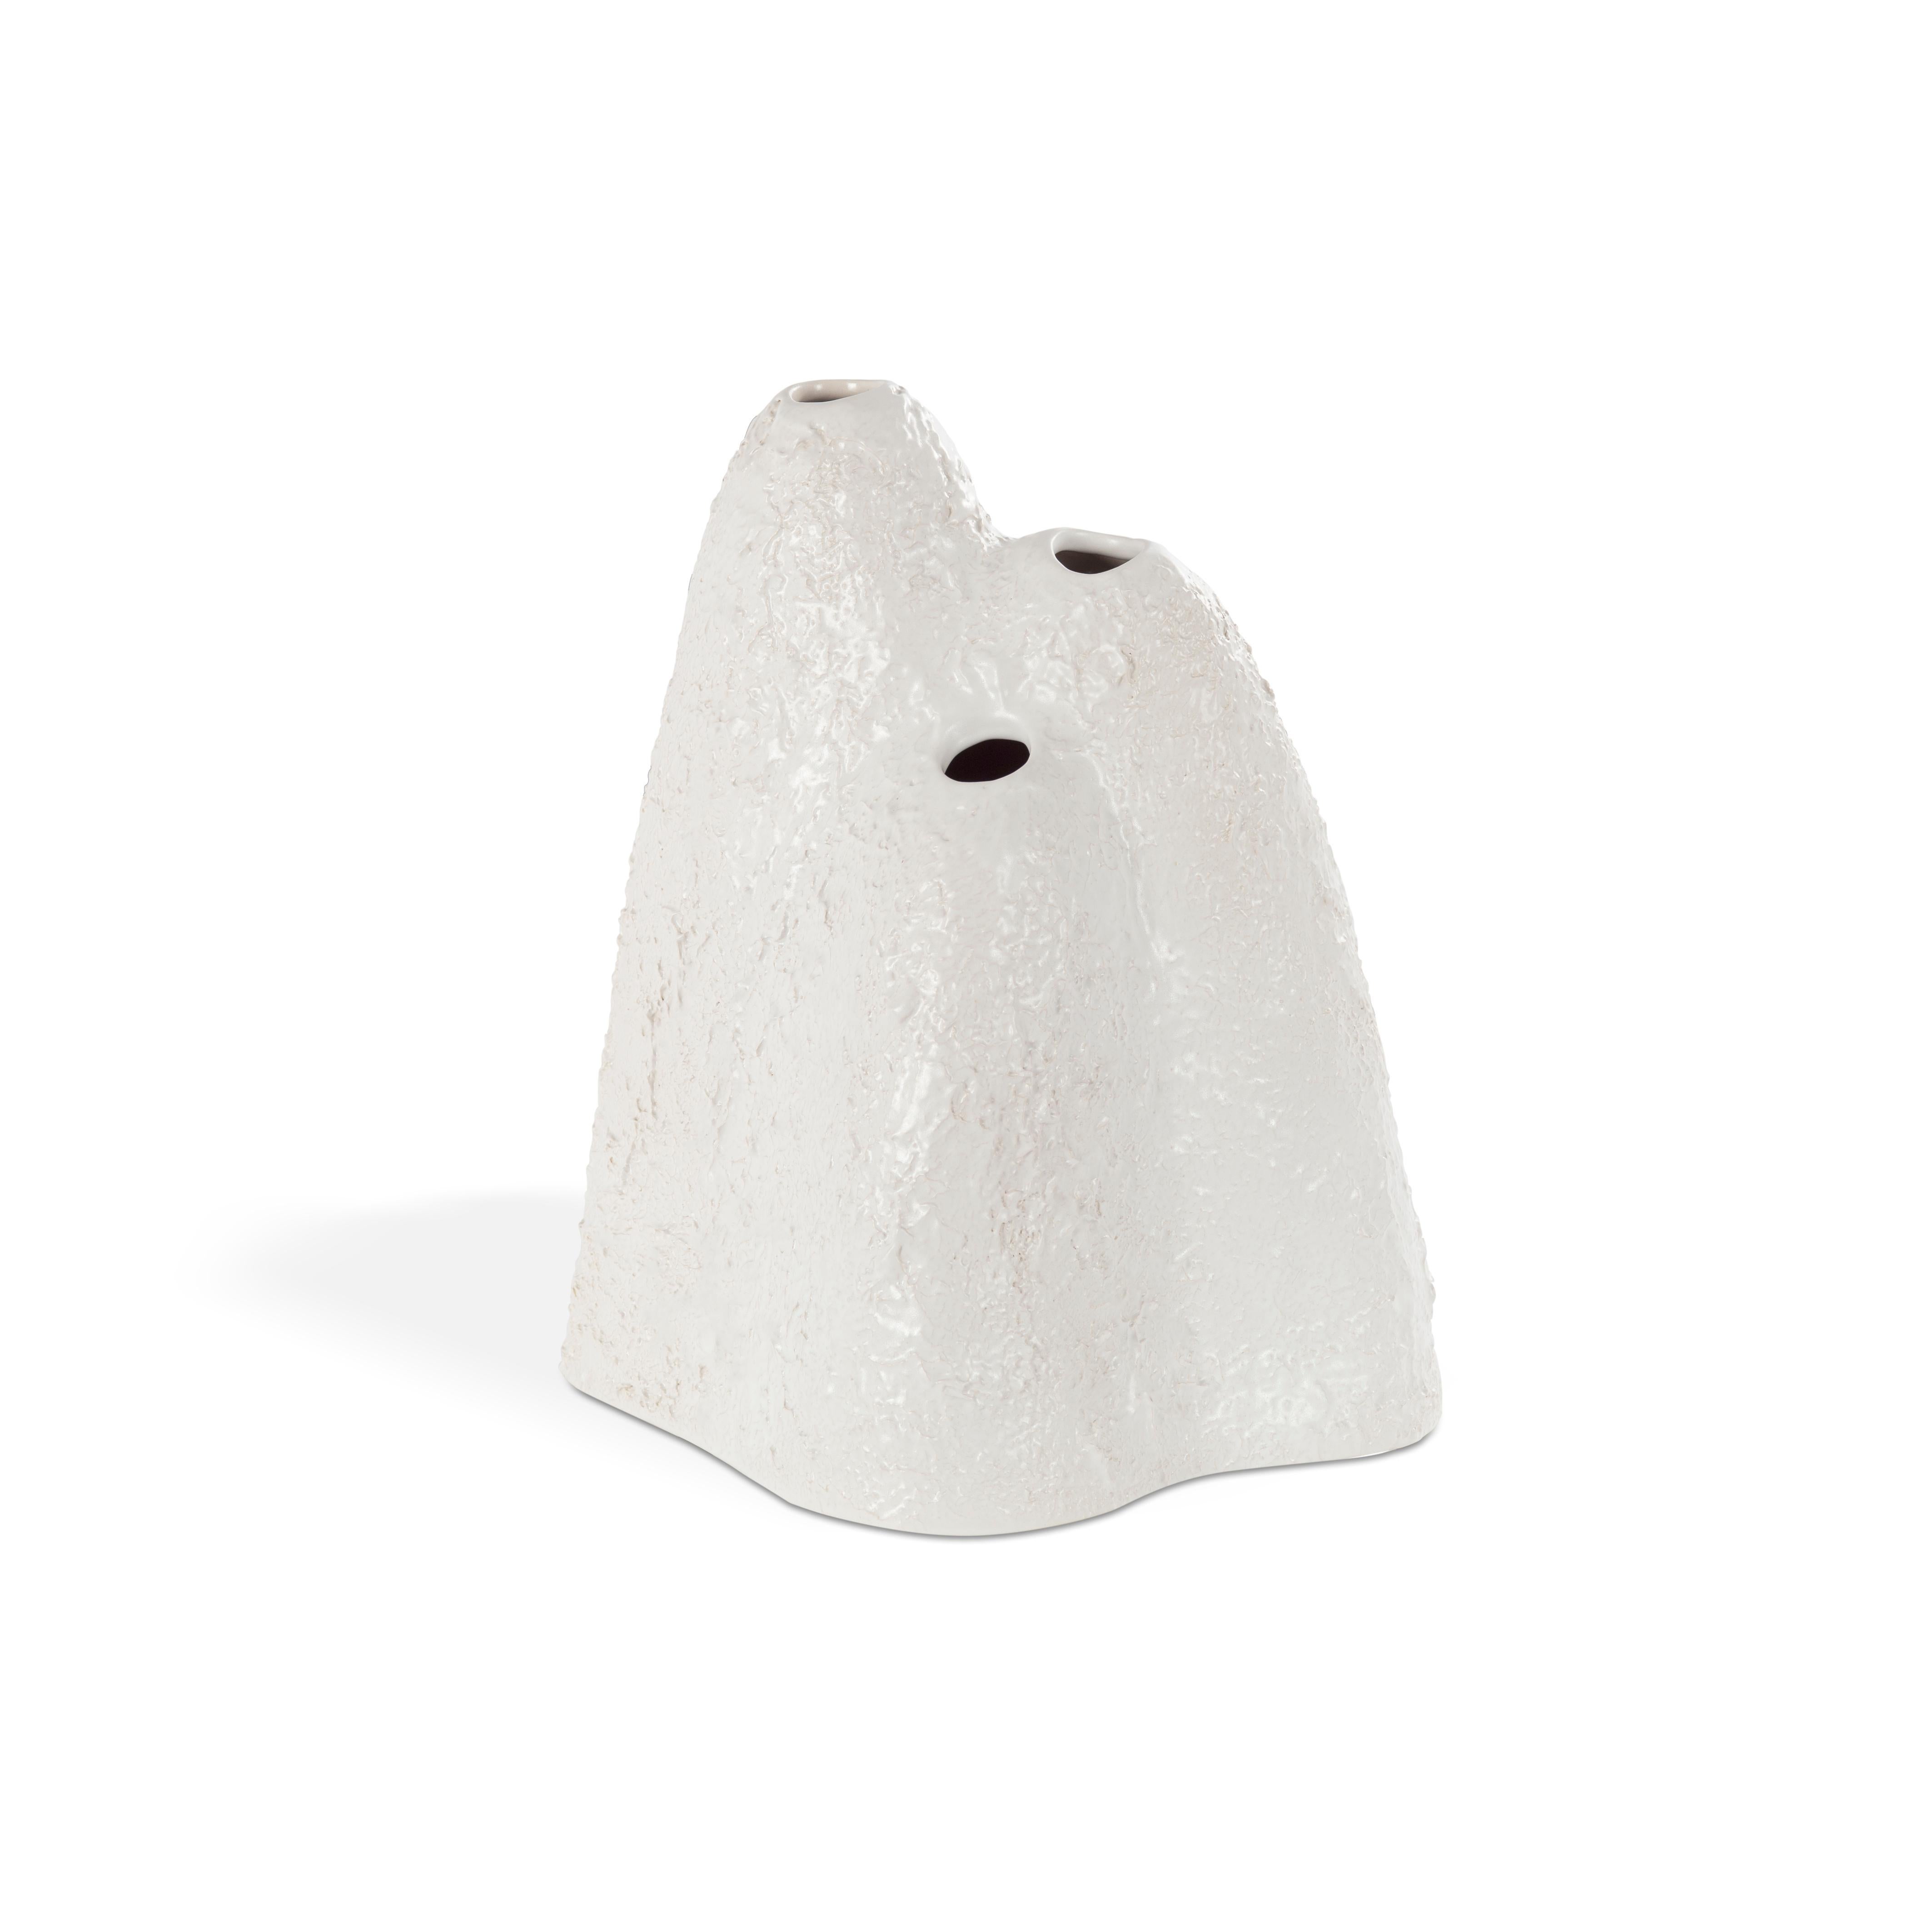 Ceramic Mountain Small White Vase by Pulpo For Sale